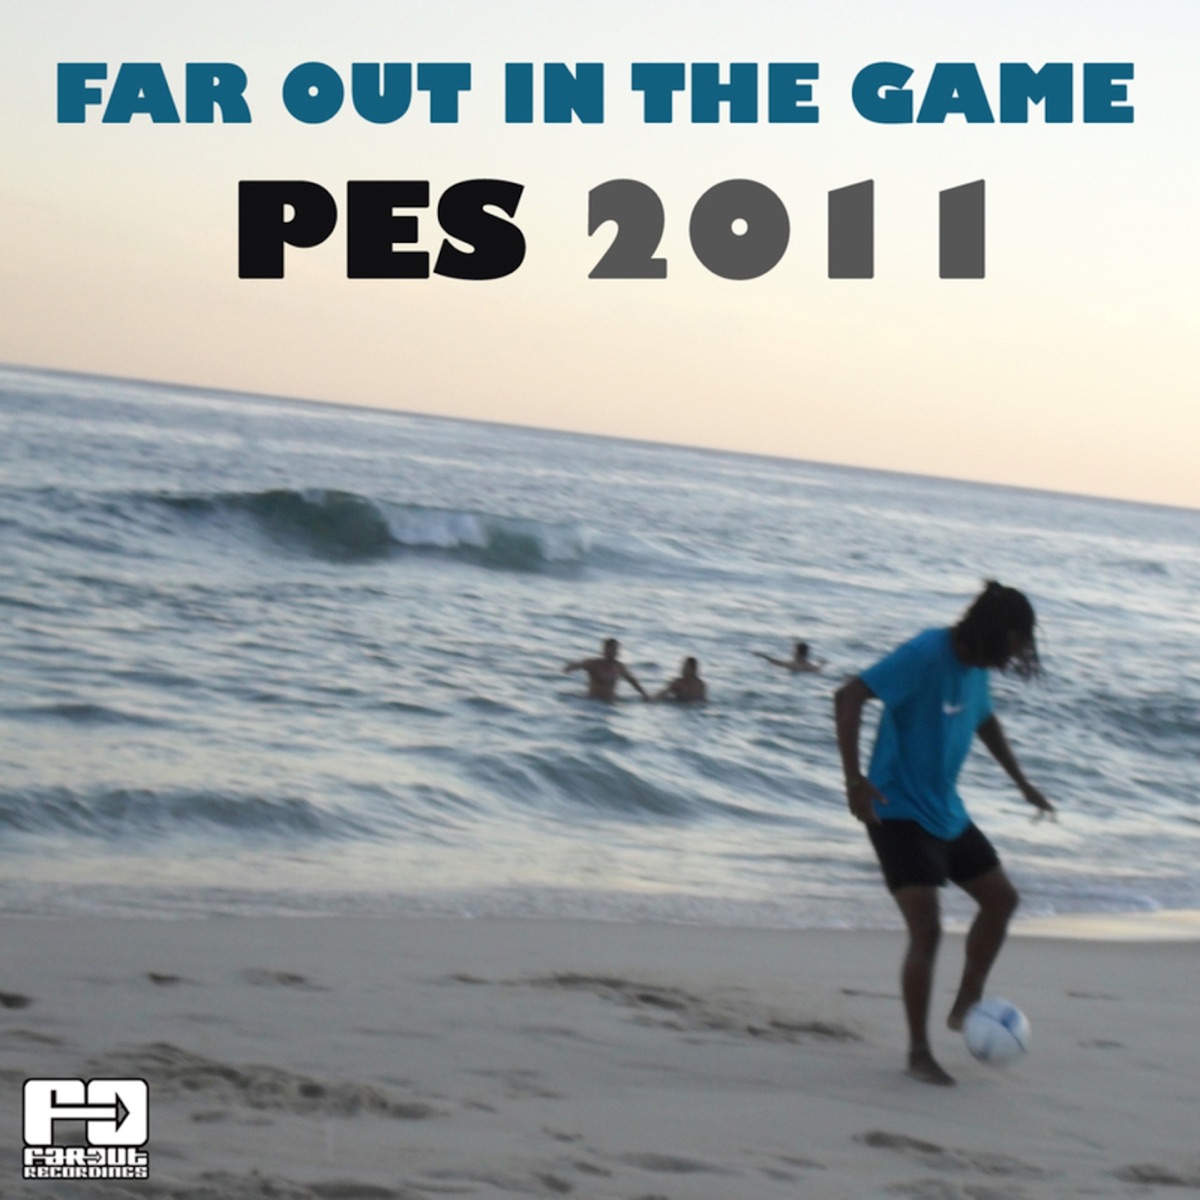 Far Out in the Game (PES 2011) - Single - Album by Azymuth & Democustico -  Apple Music